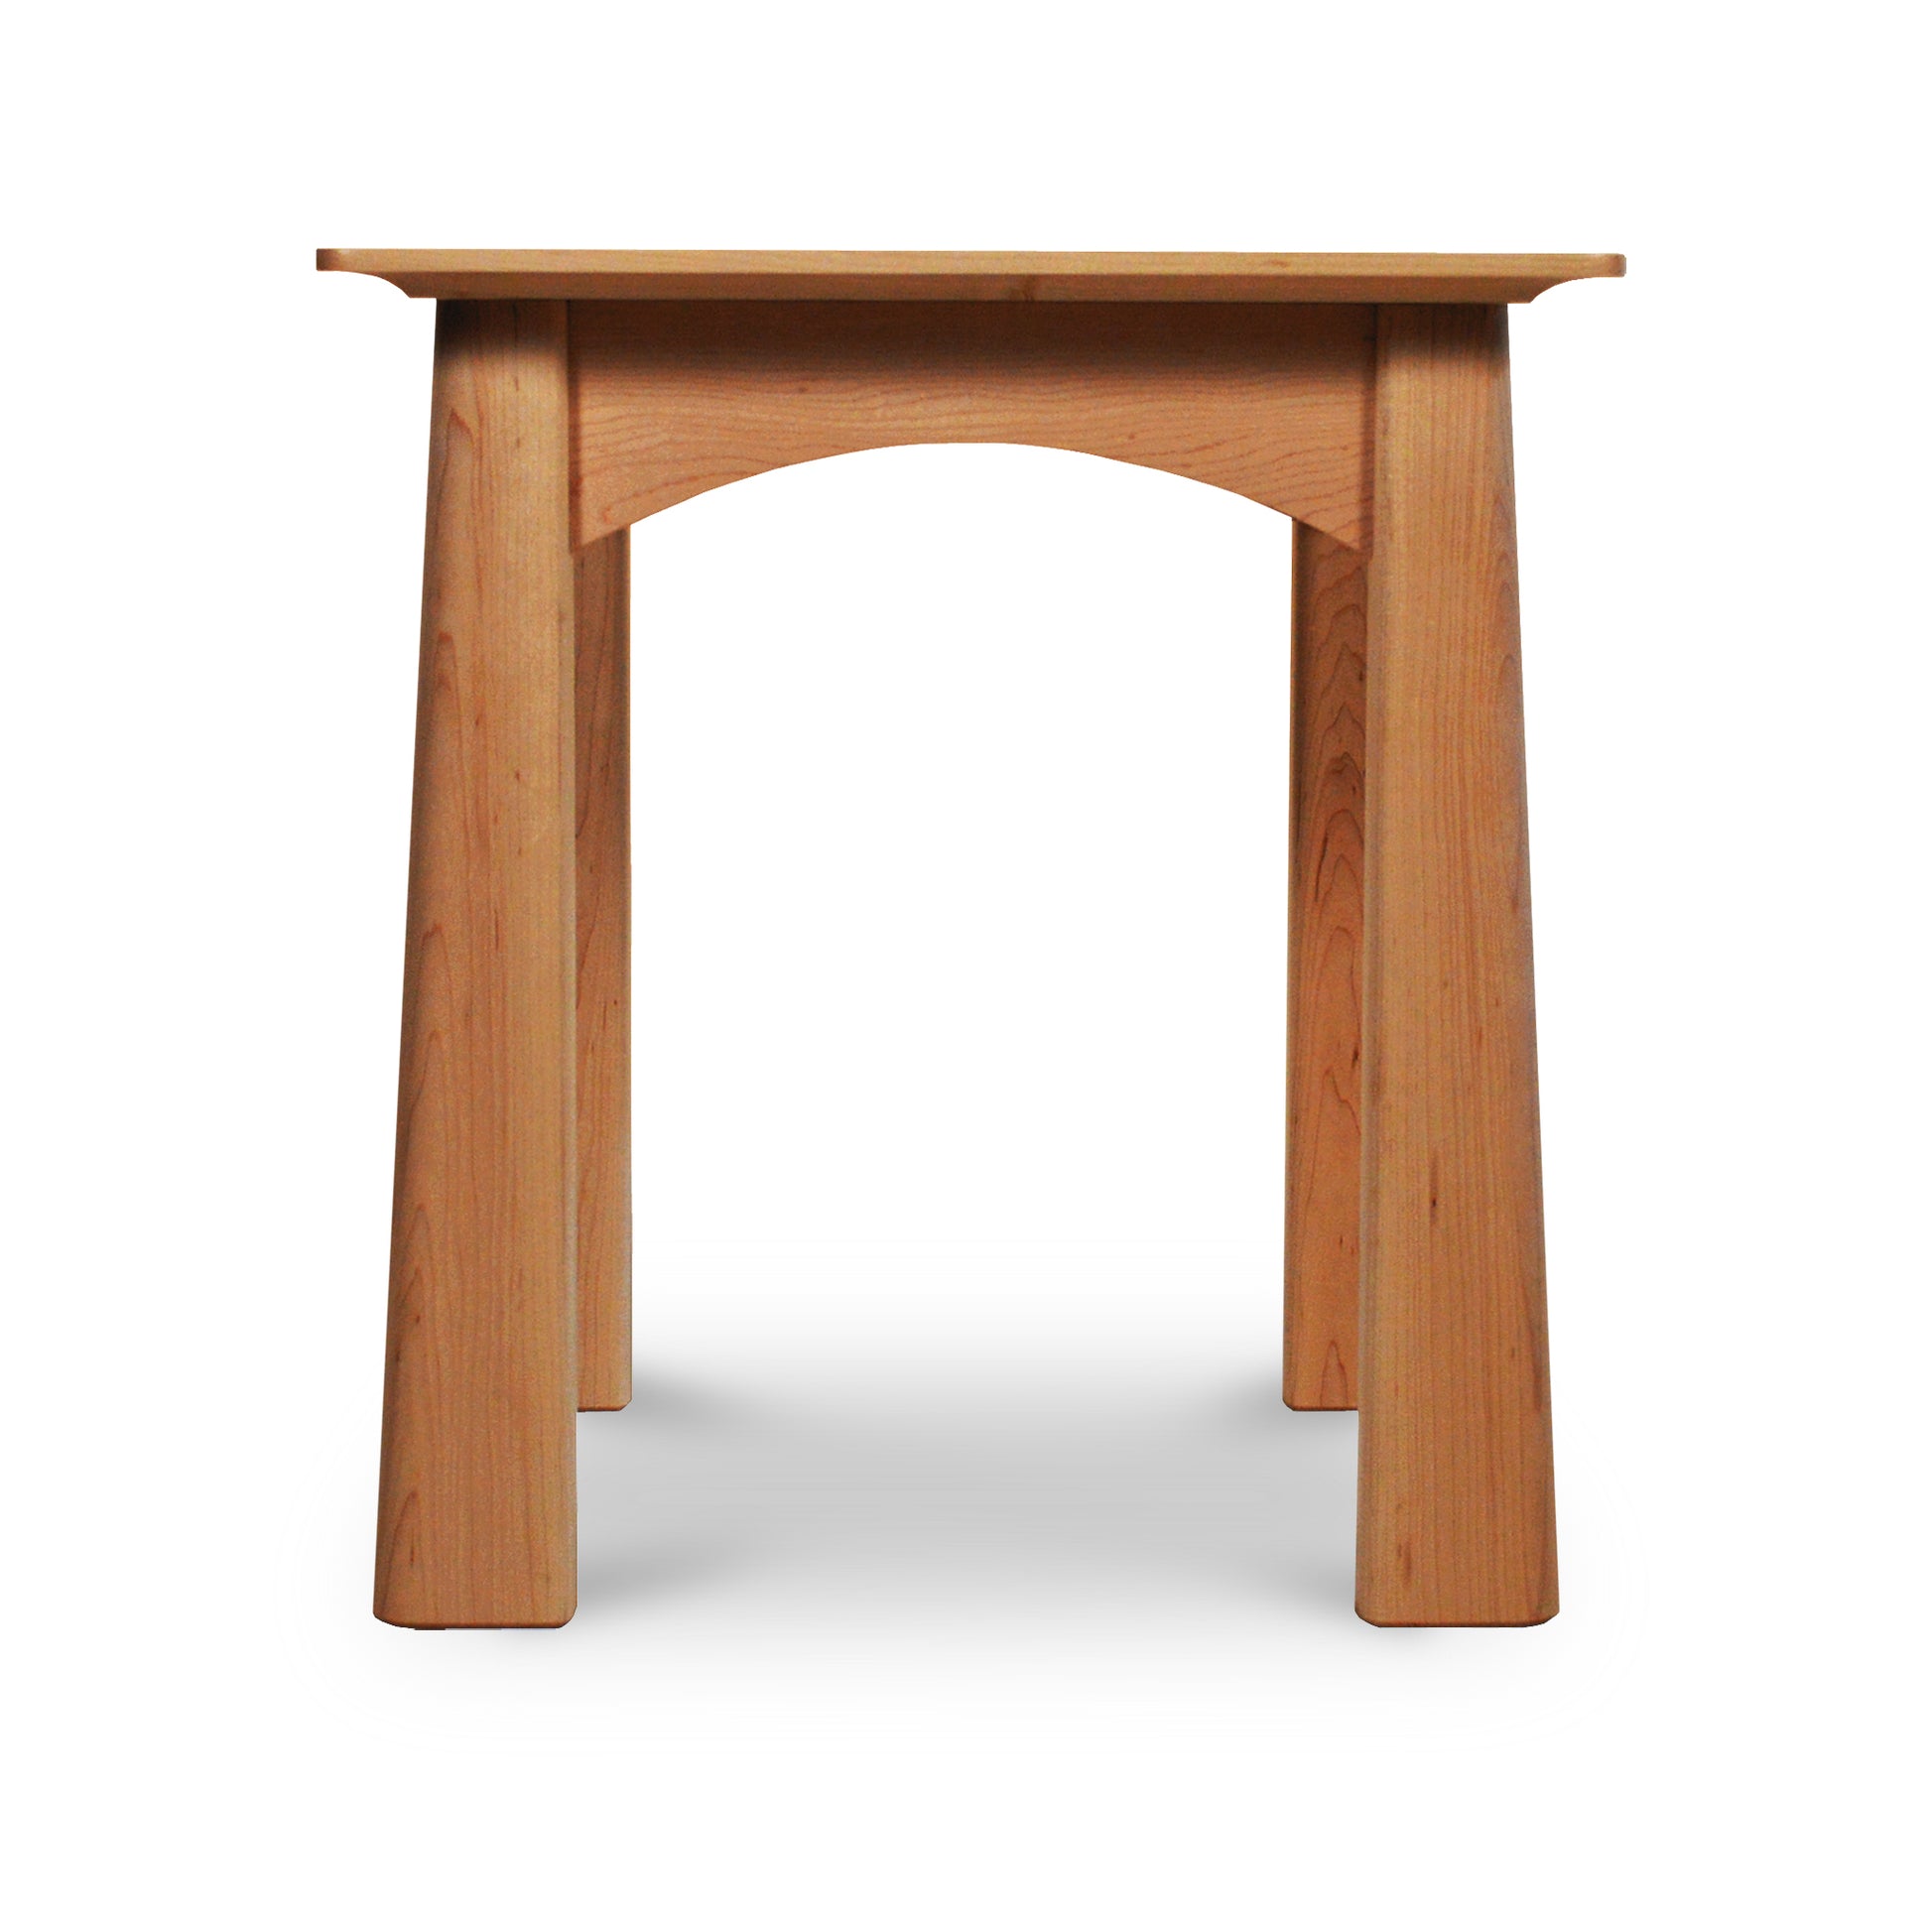 A Maple Corner Woodworks Cherry Moon End Table, crafted from solid hardwoods, features a smooth, flat top and three legs in a simple, sturdy style. The end table is photographed against a plain white background, accentuating its natural.